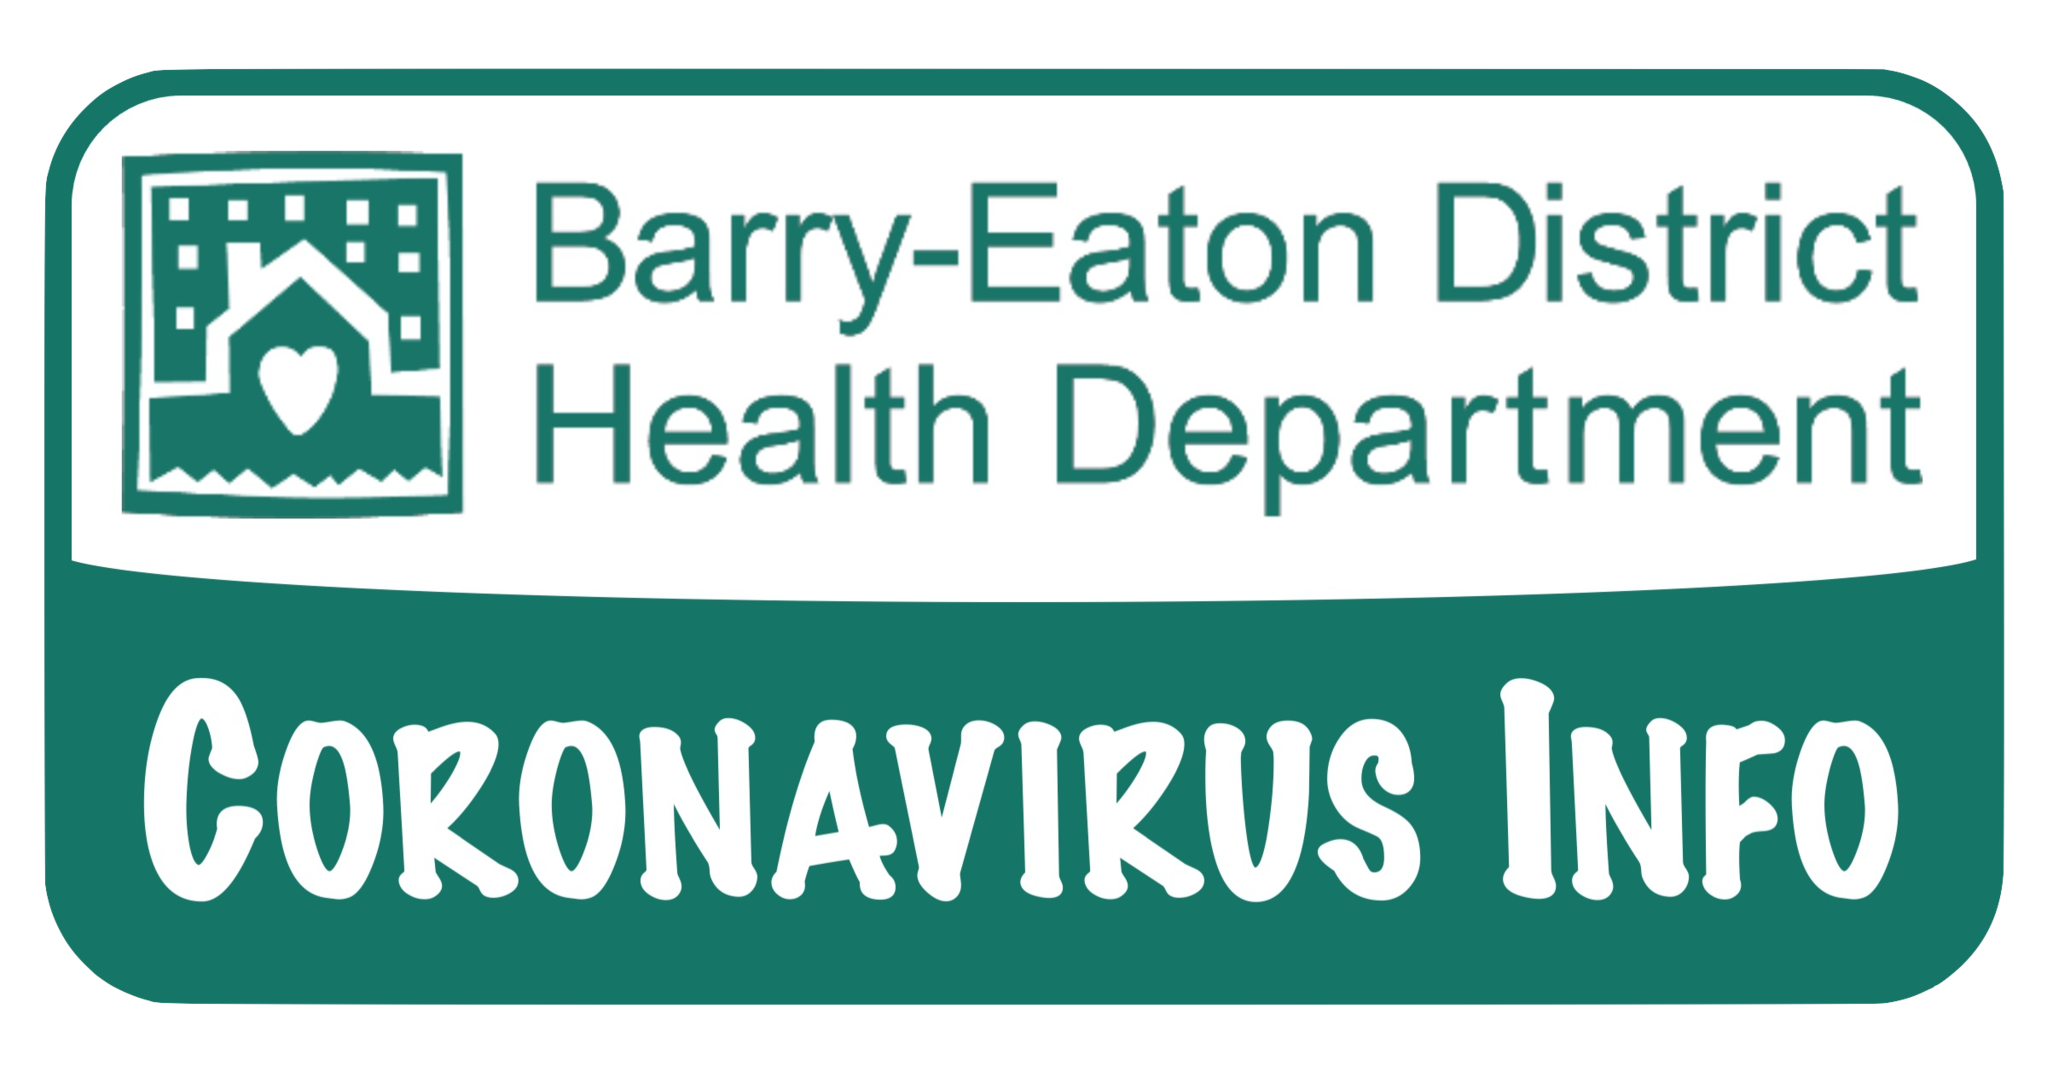 Barry-Eaton District Health Department